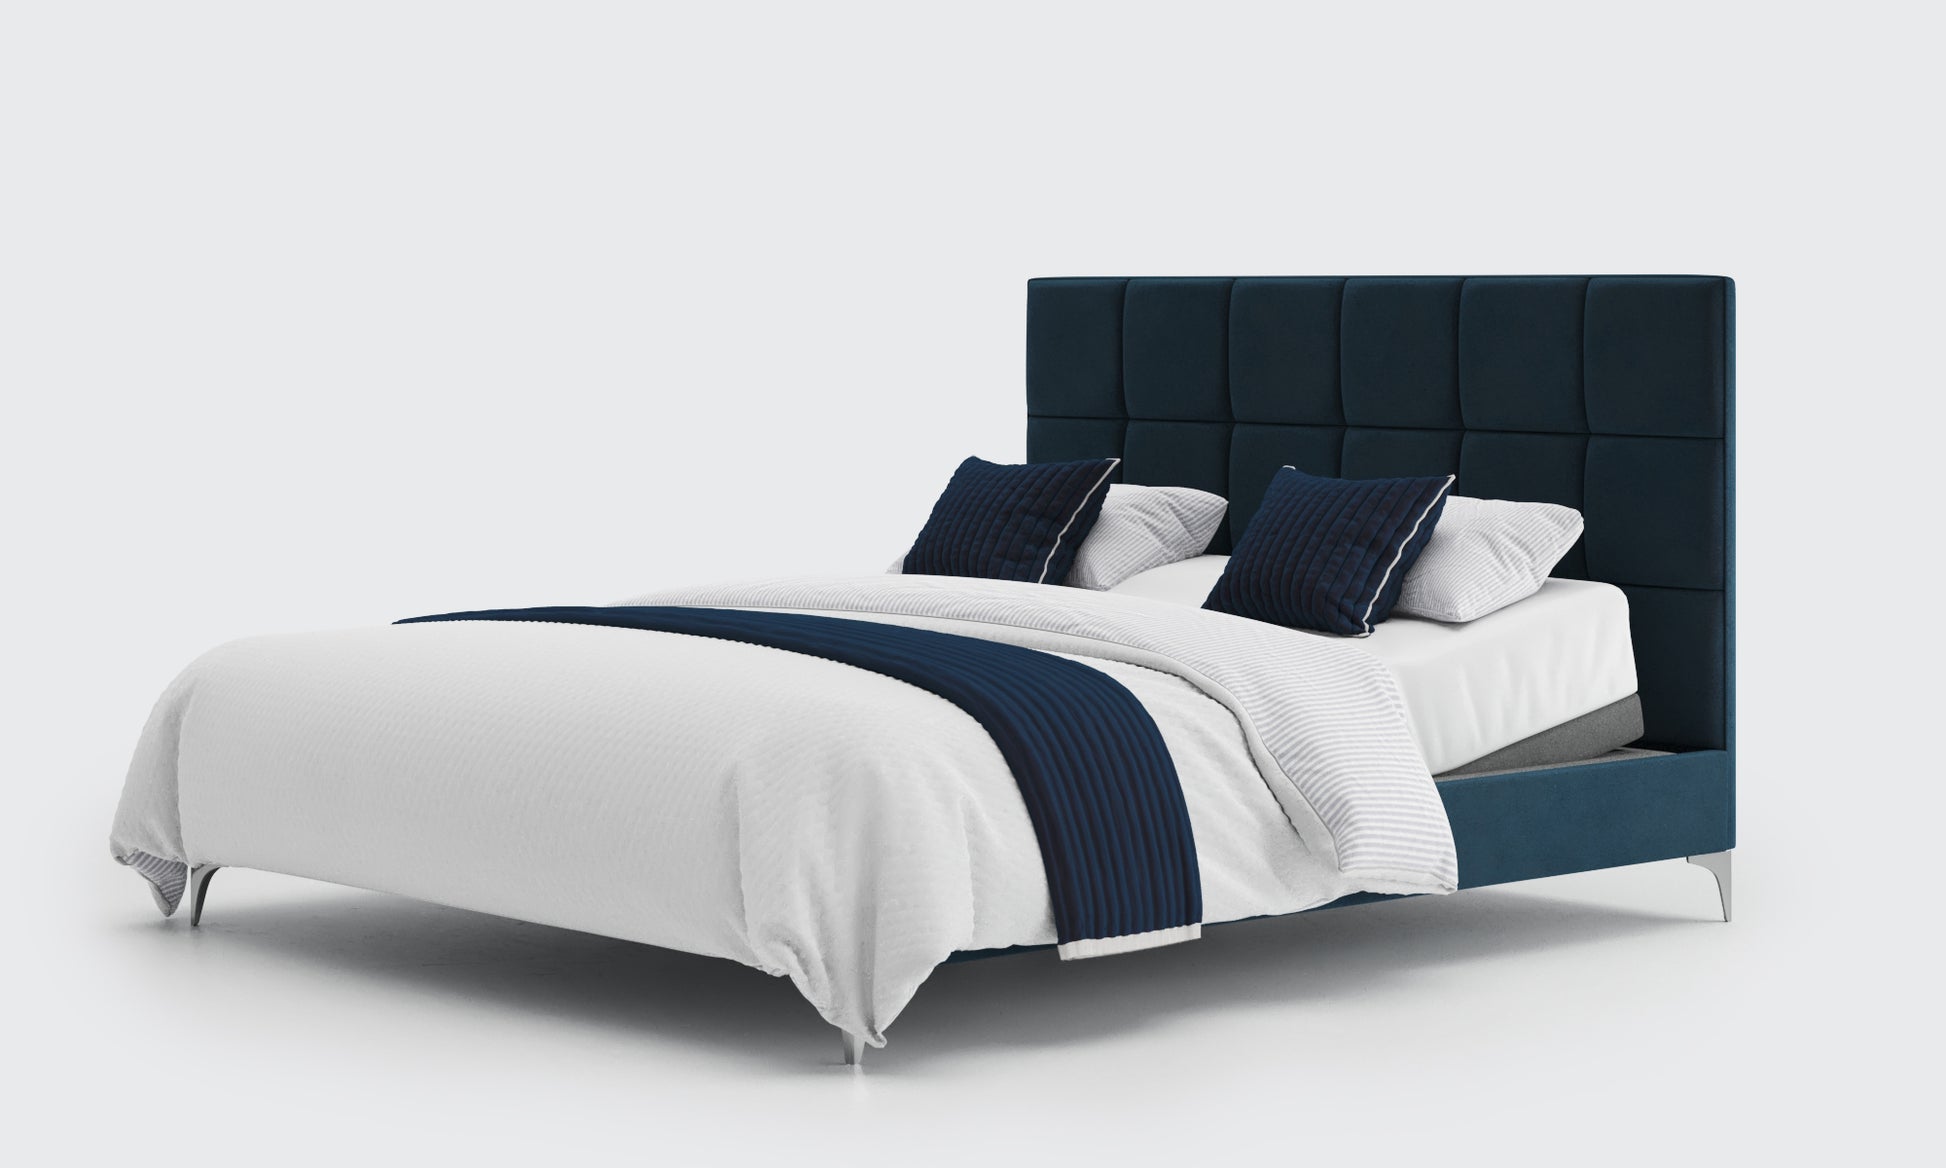 Borg 6ft double bed and mattress in the royal velvet material